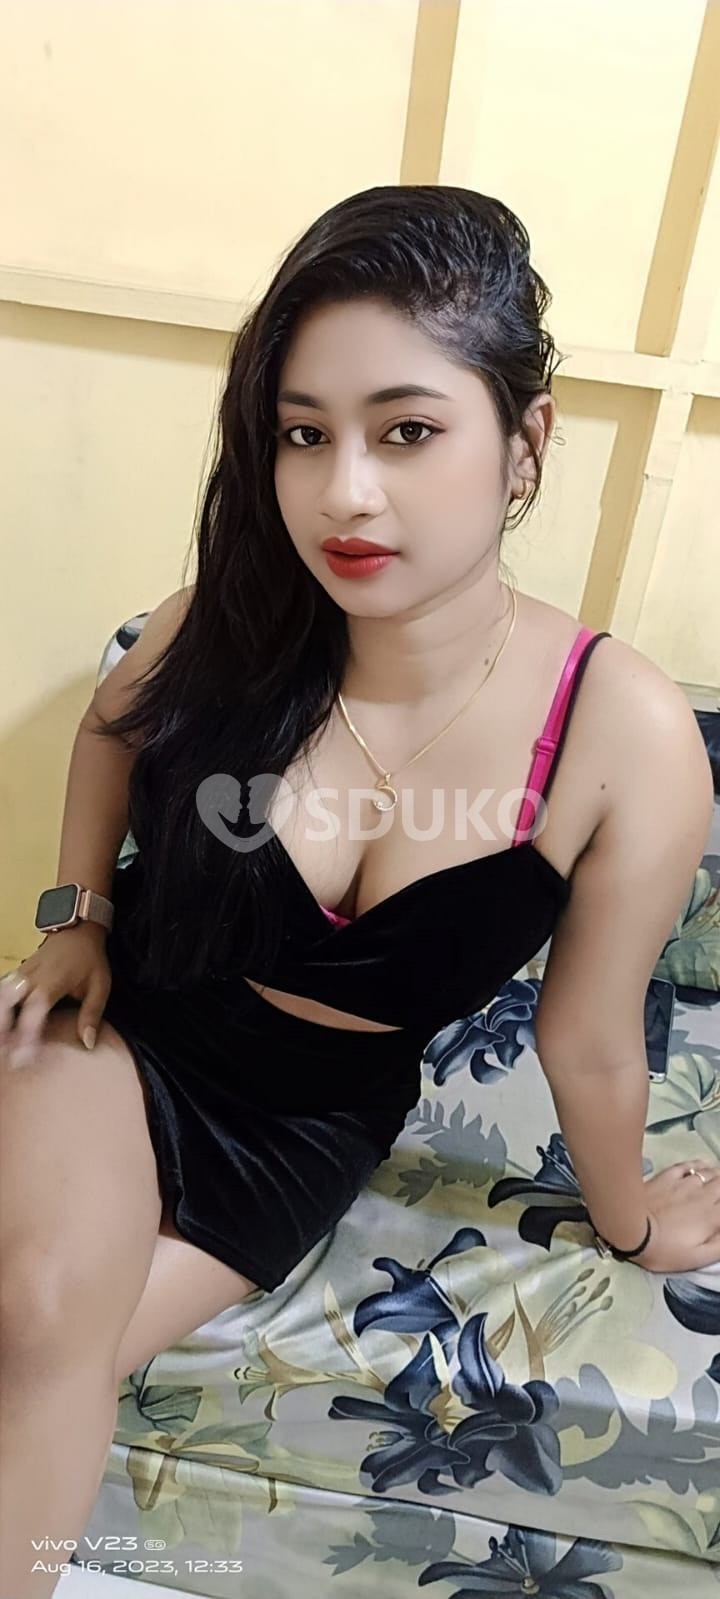 Kerala ❣️Best call girl //service in low price high profile call girl available call me anytime